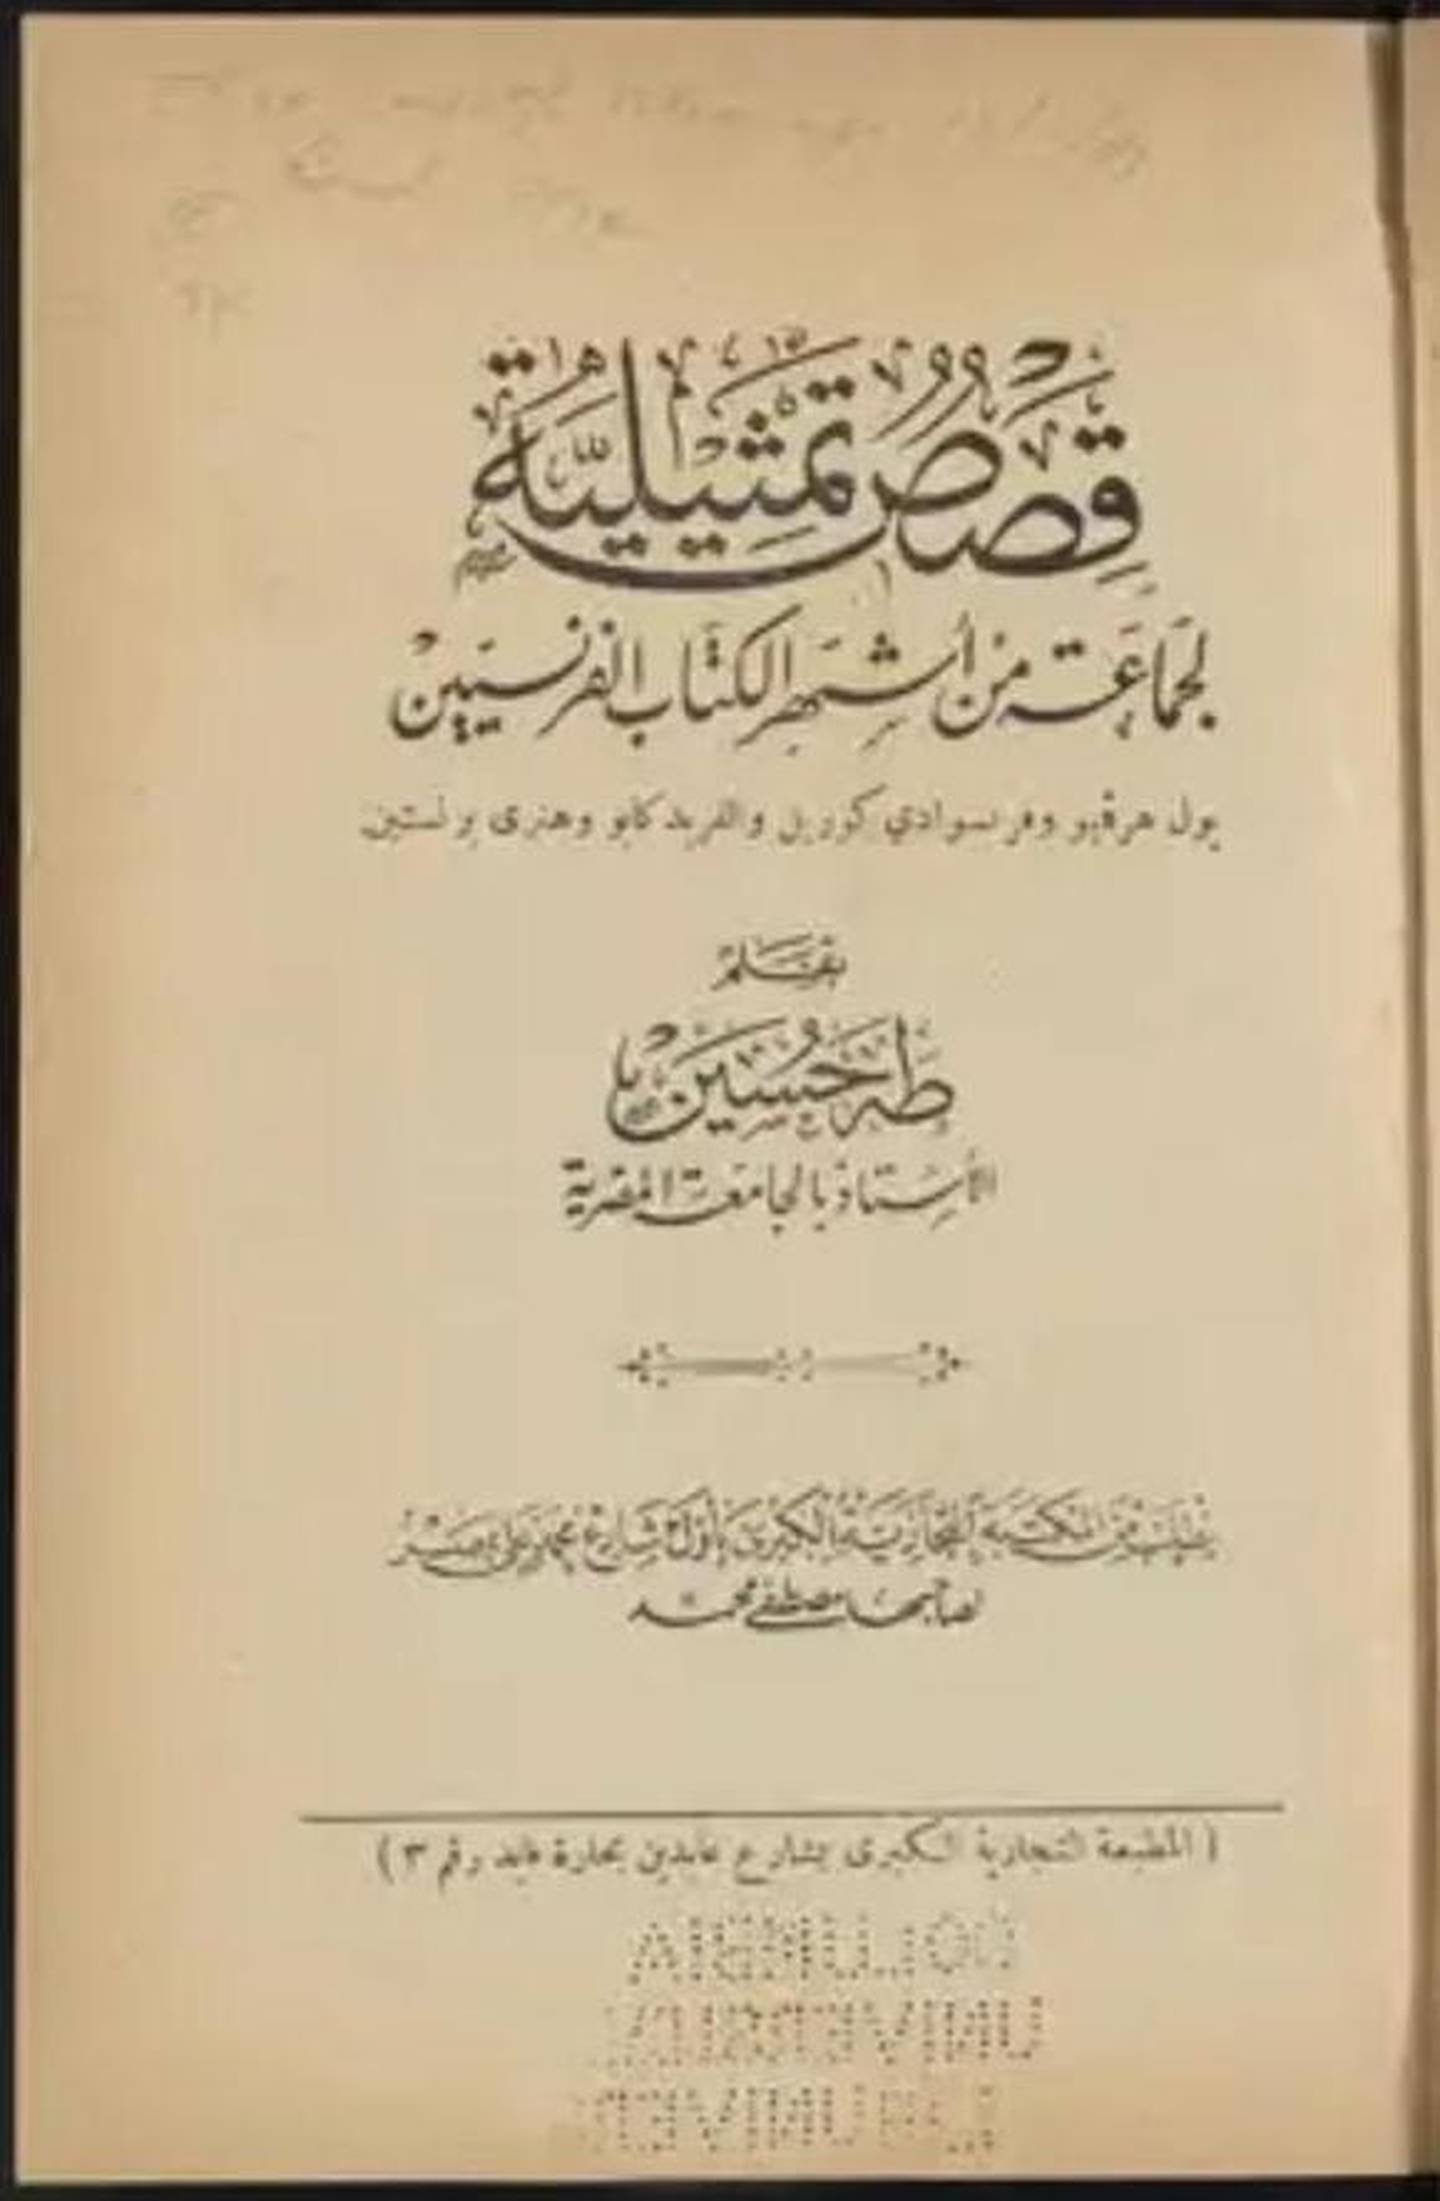 'Dramas by a Group of the Most Famous French Writers 1924' by Taha Hussein. Courtesy Qasr Al Watan Library